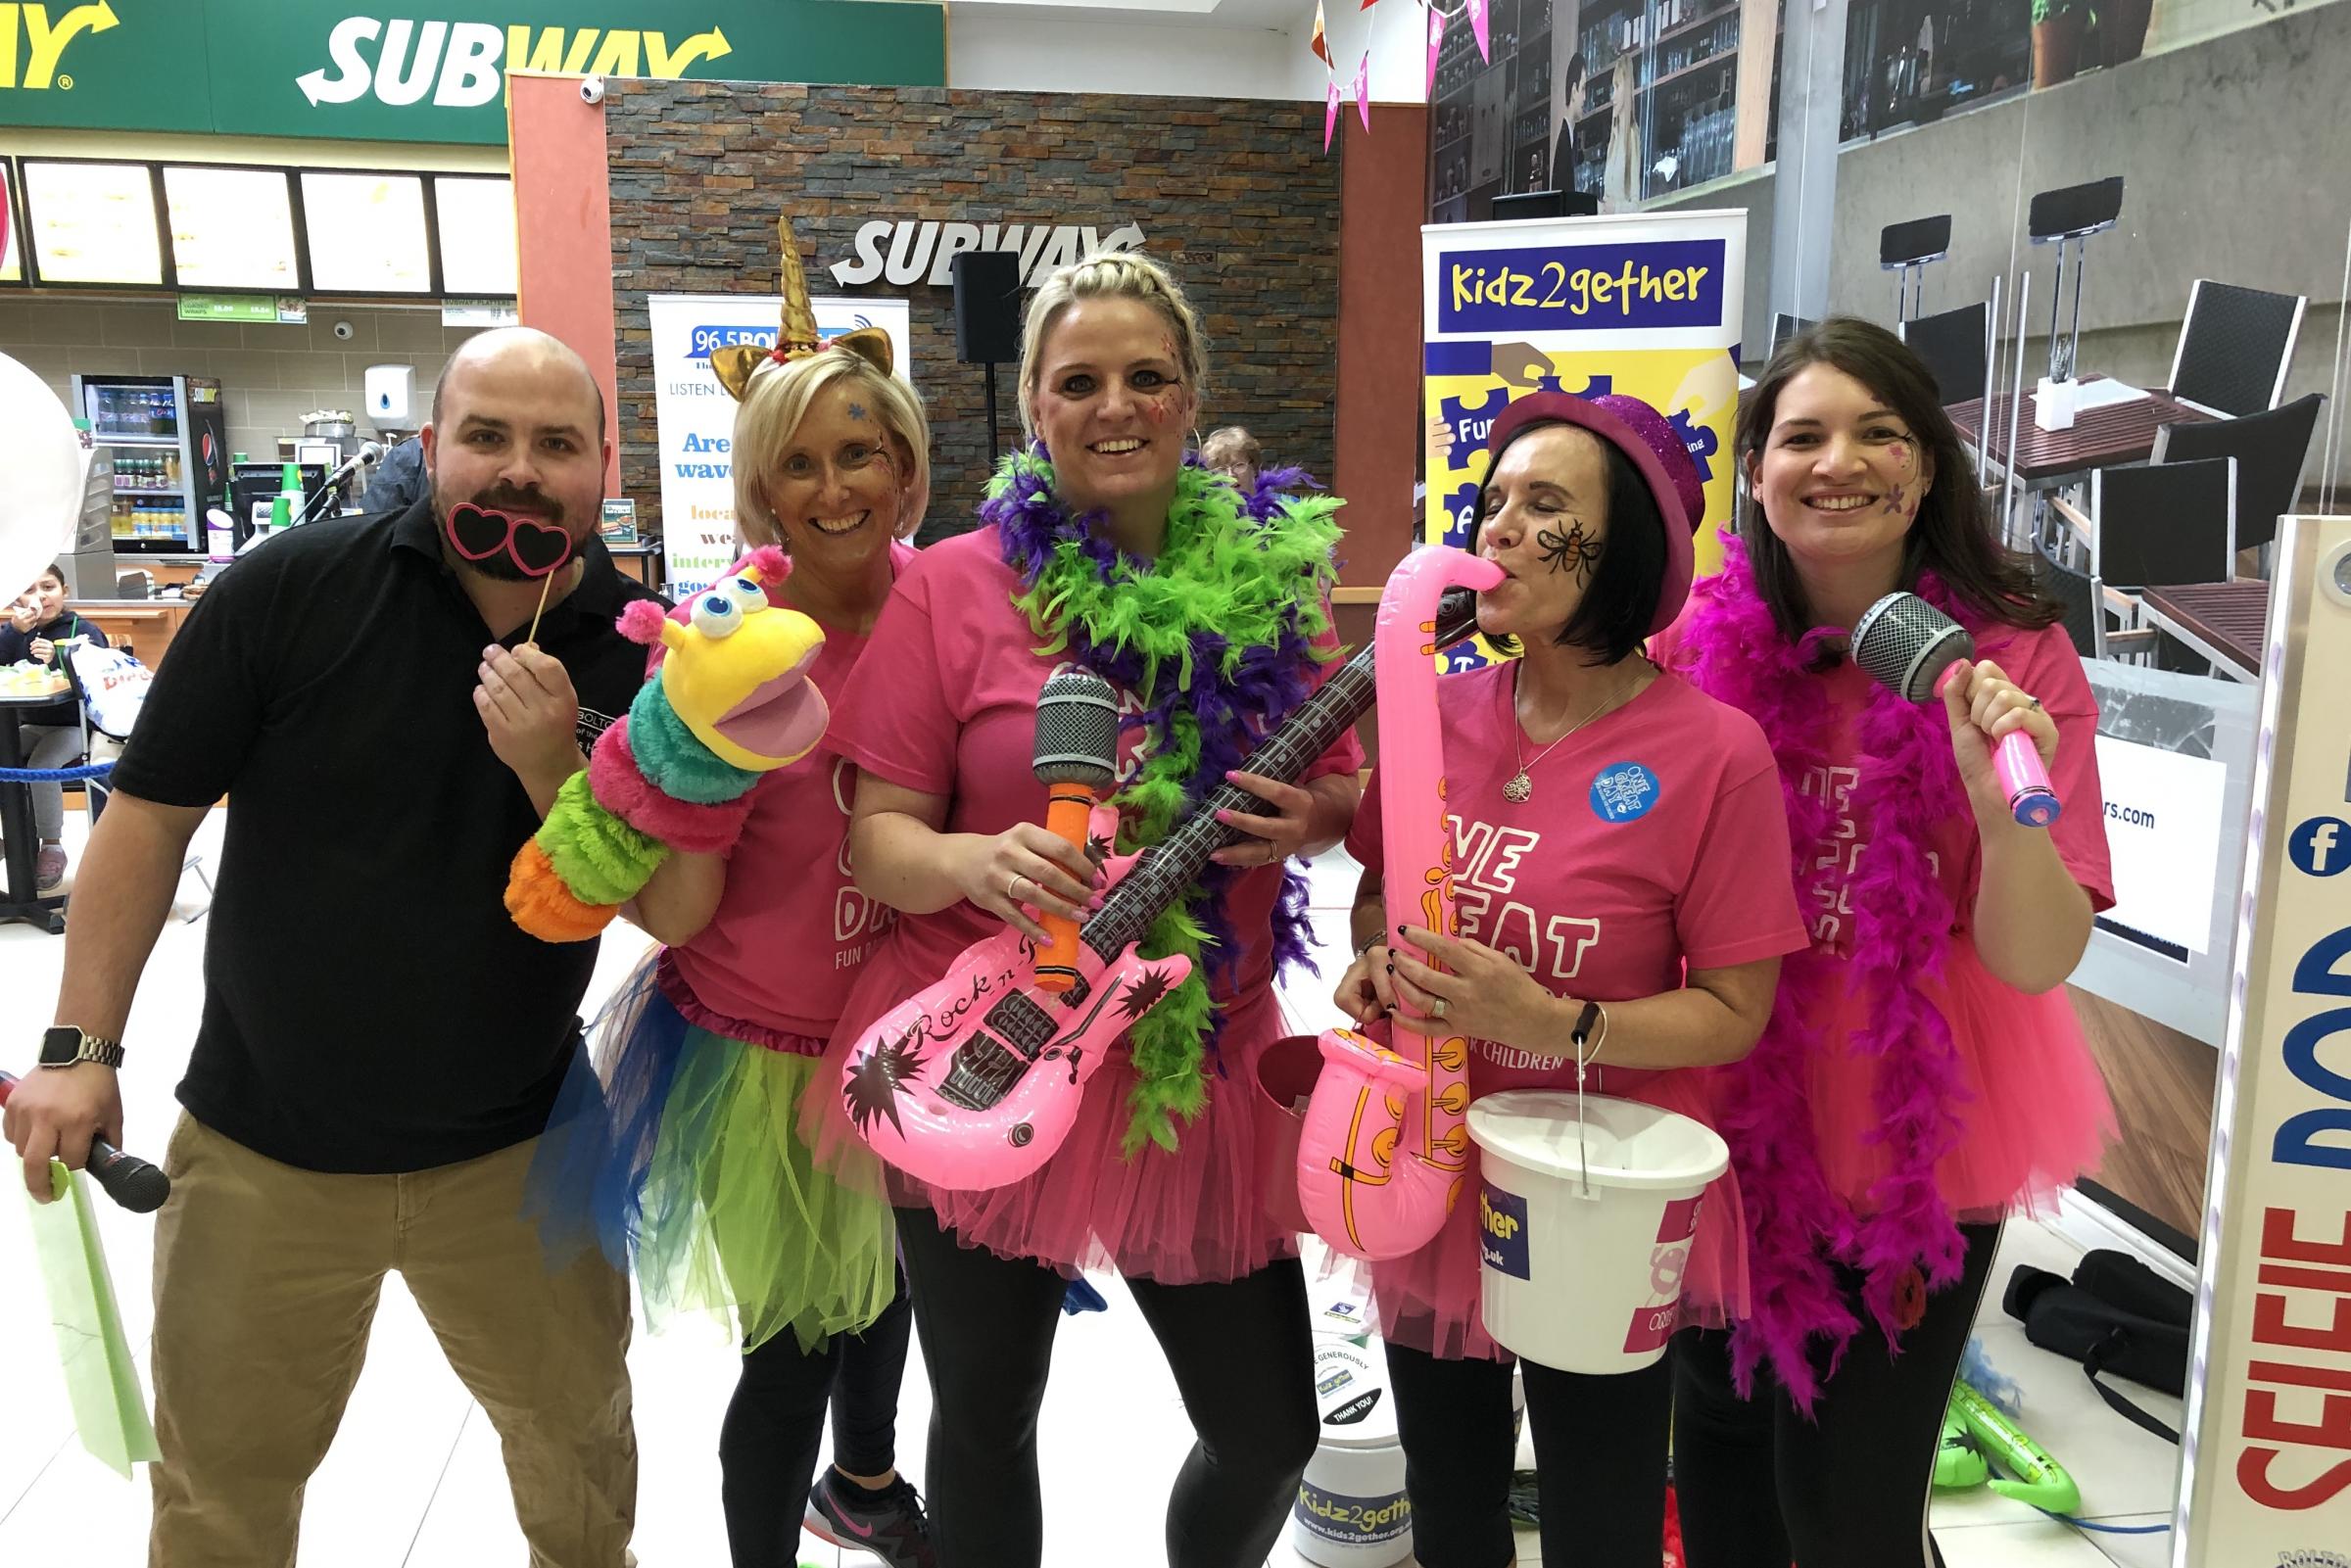 Dancers don feather boas for One Great Day in aid of children's charities